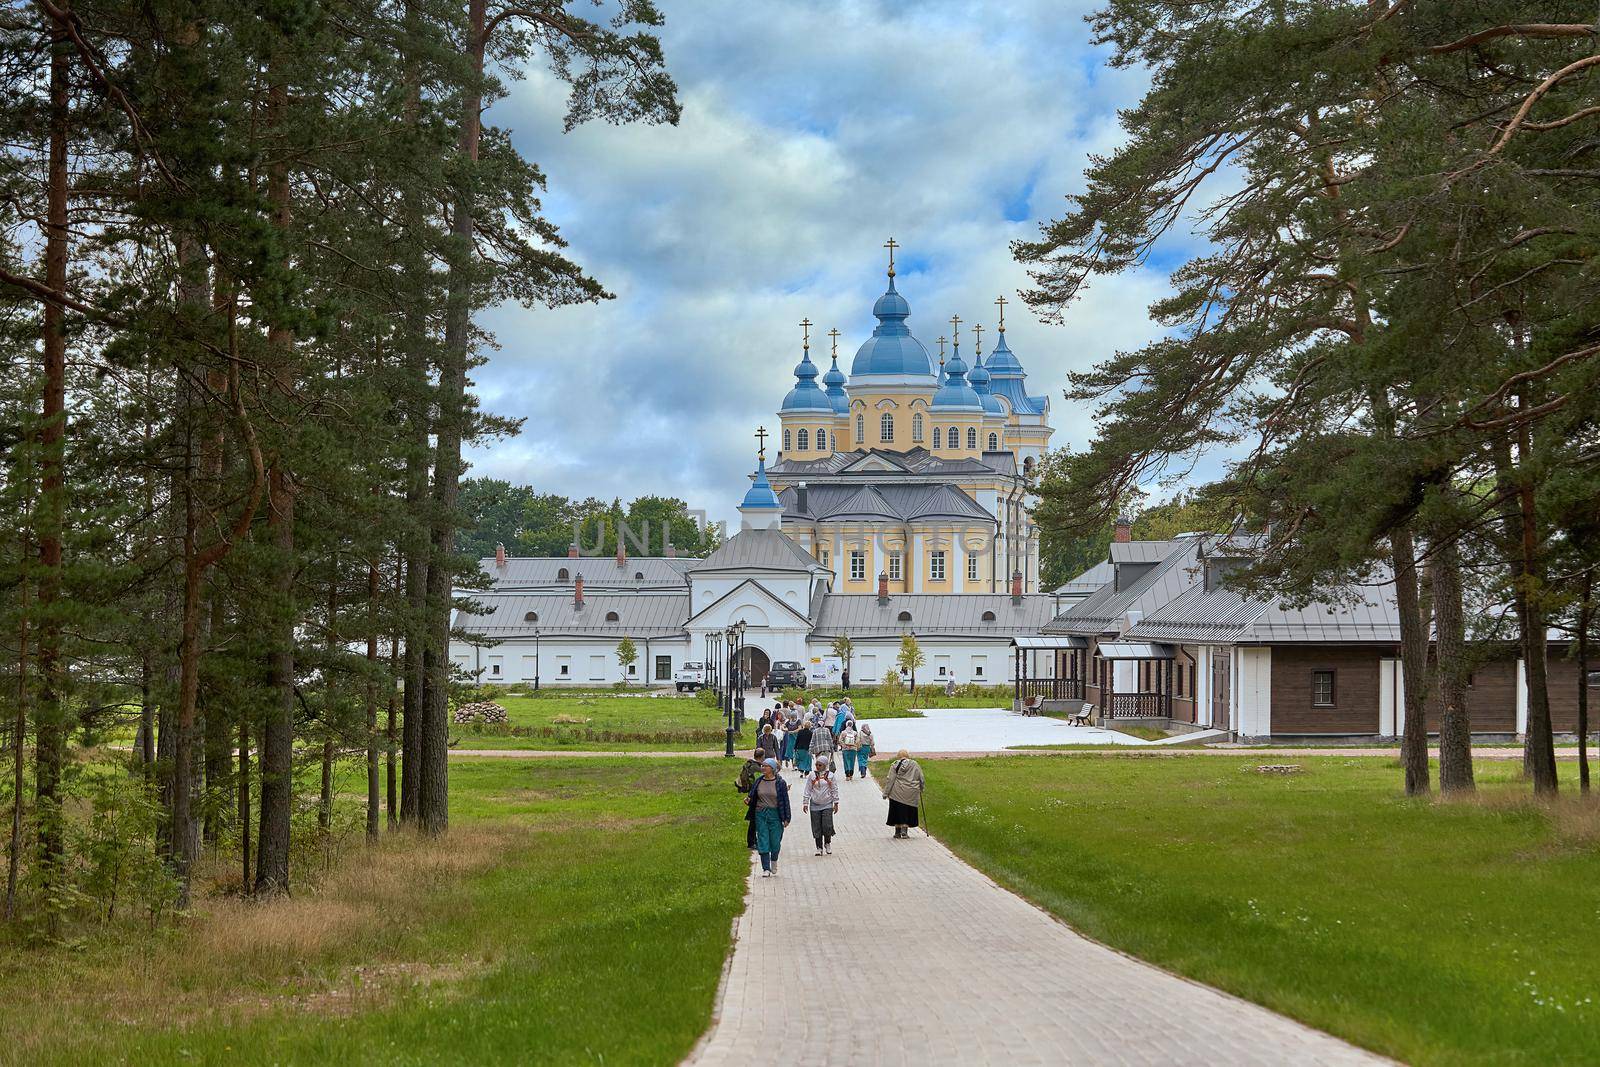 A group of religious pilgrims visited the Konevets Monastery in Russia by vizland